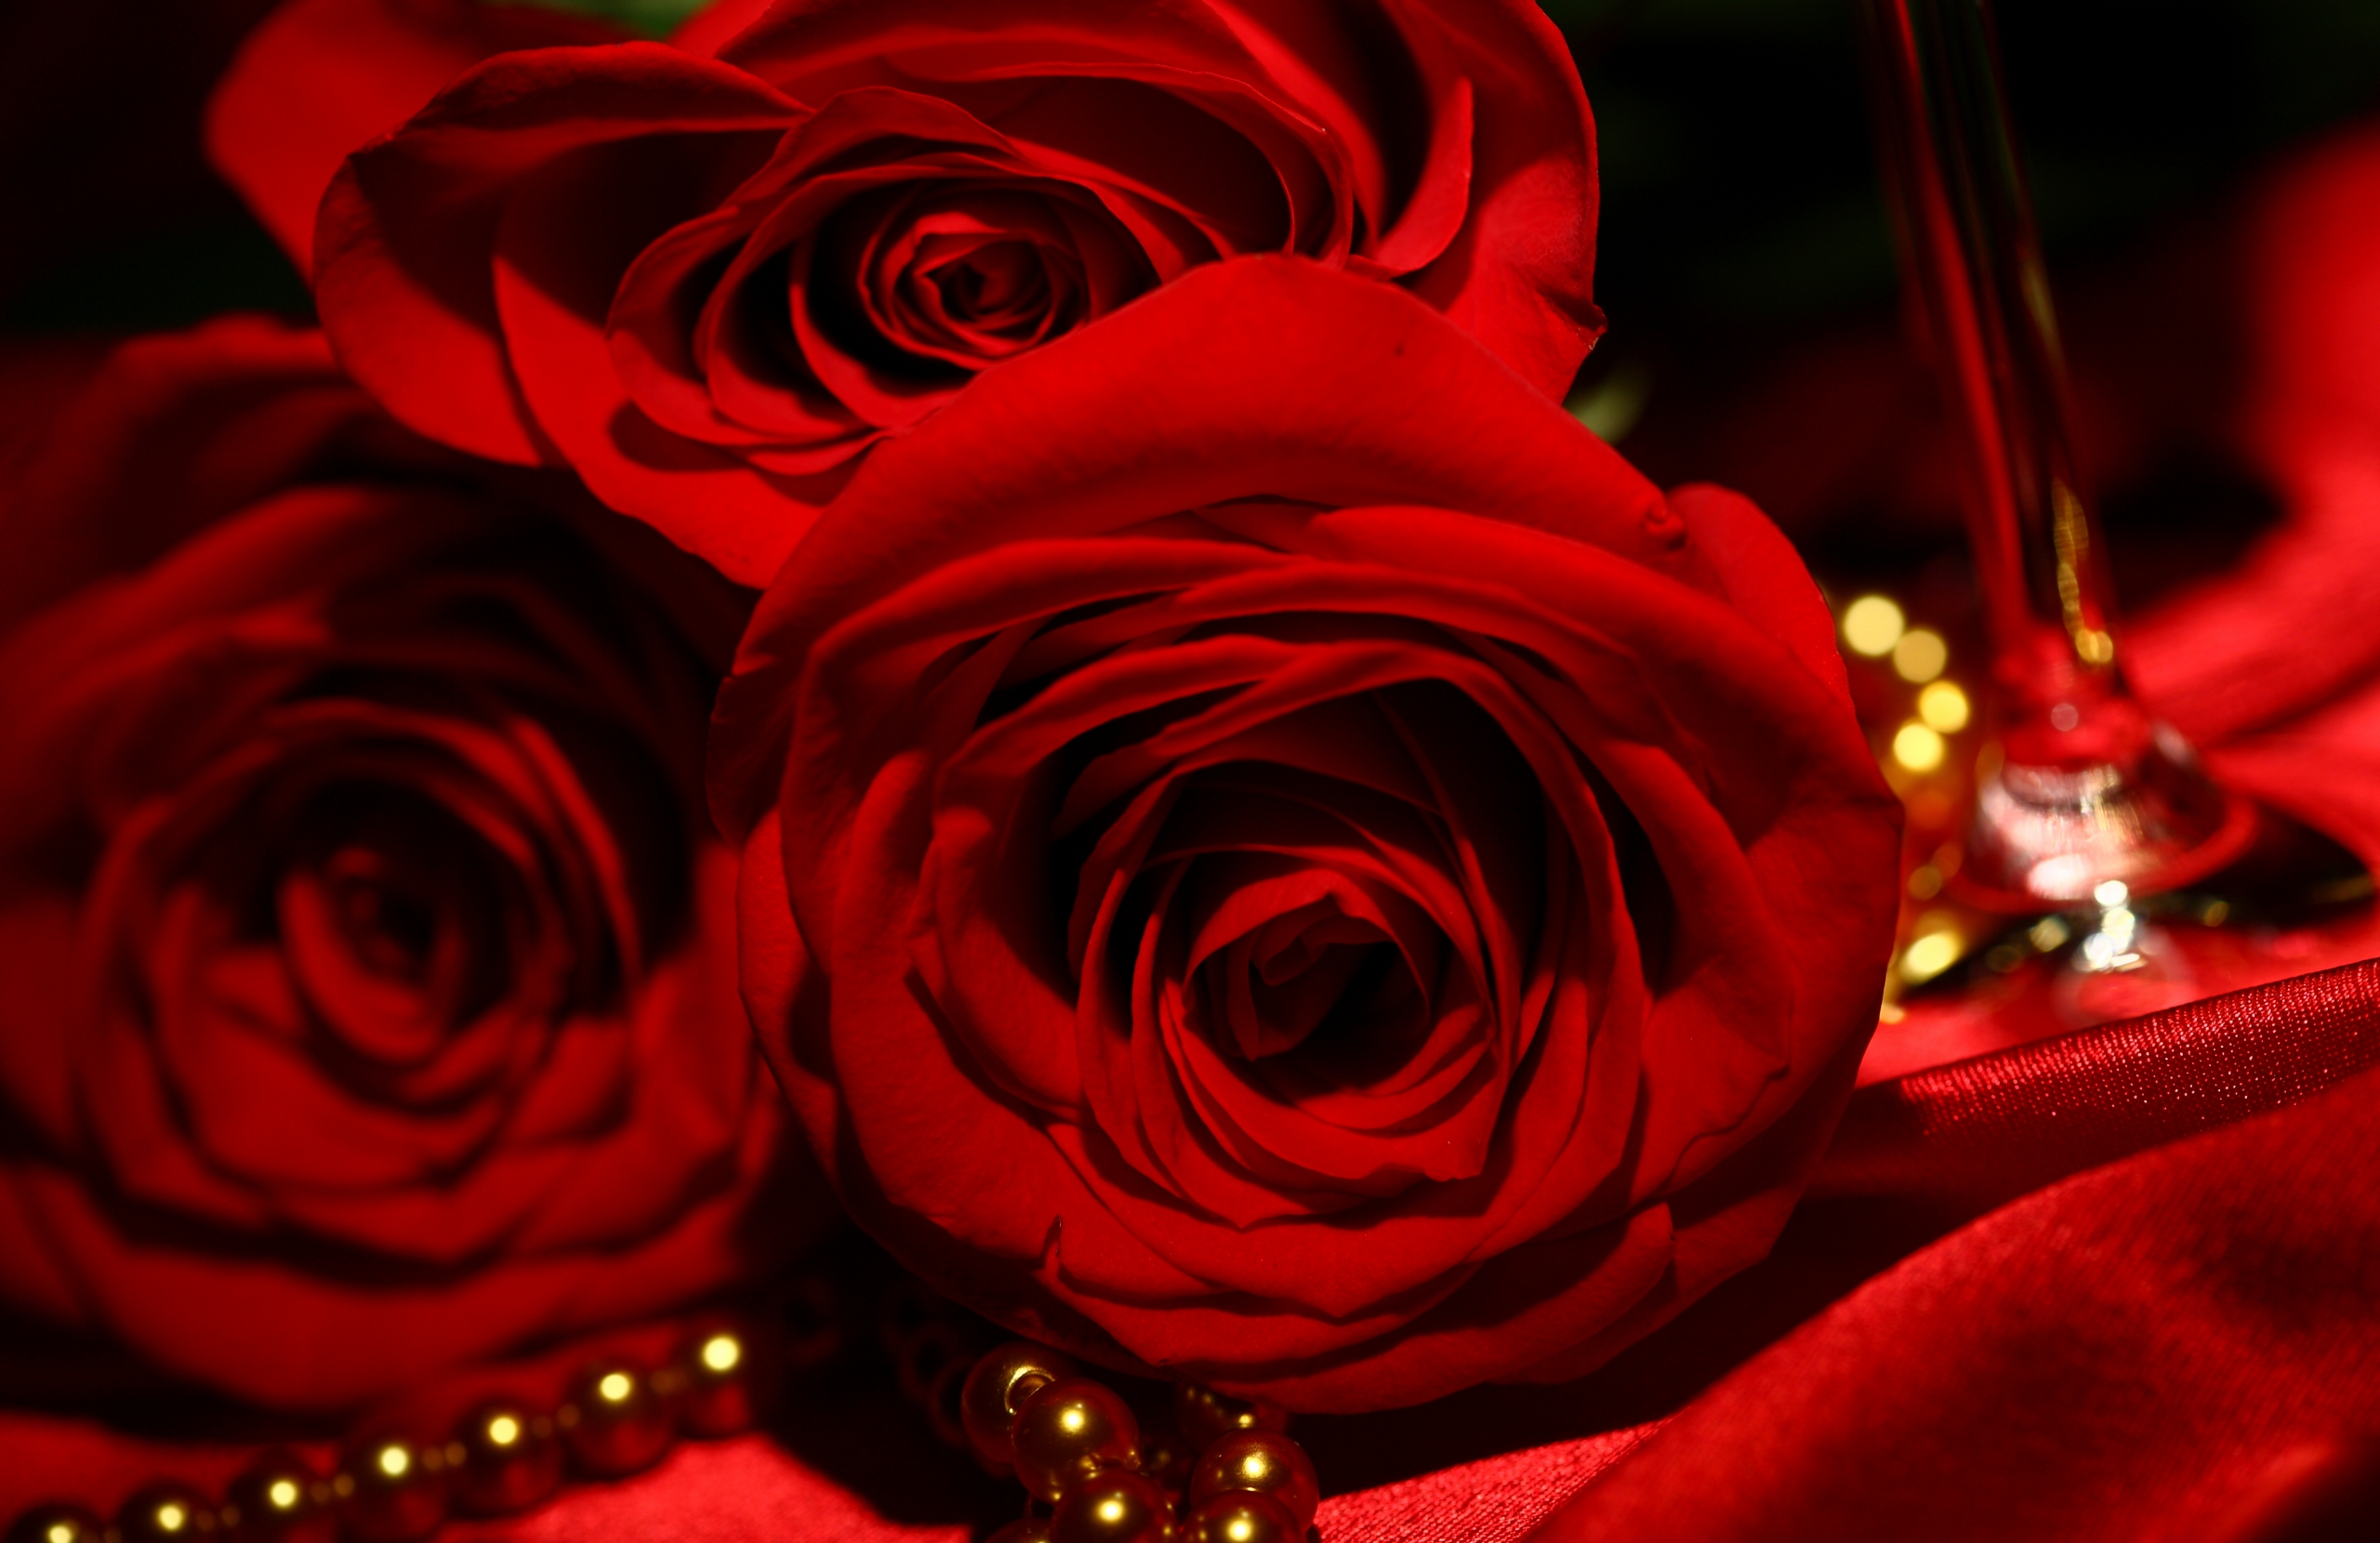 Red Roses Wallpapers HD A39 beads